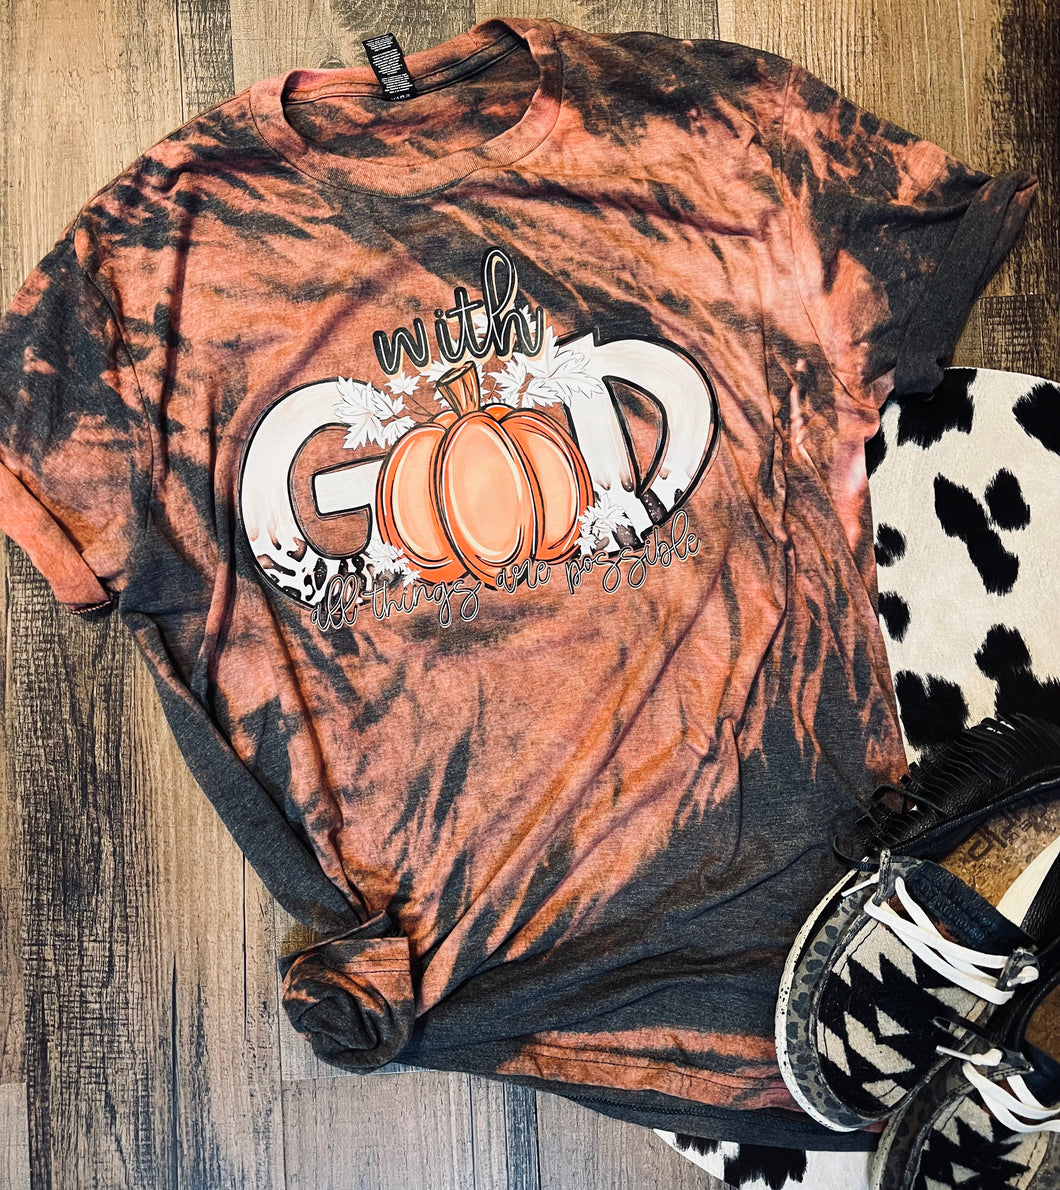 With god all things are possible bleached graphic tee - Mavictoria Designs Hot Press Express